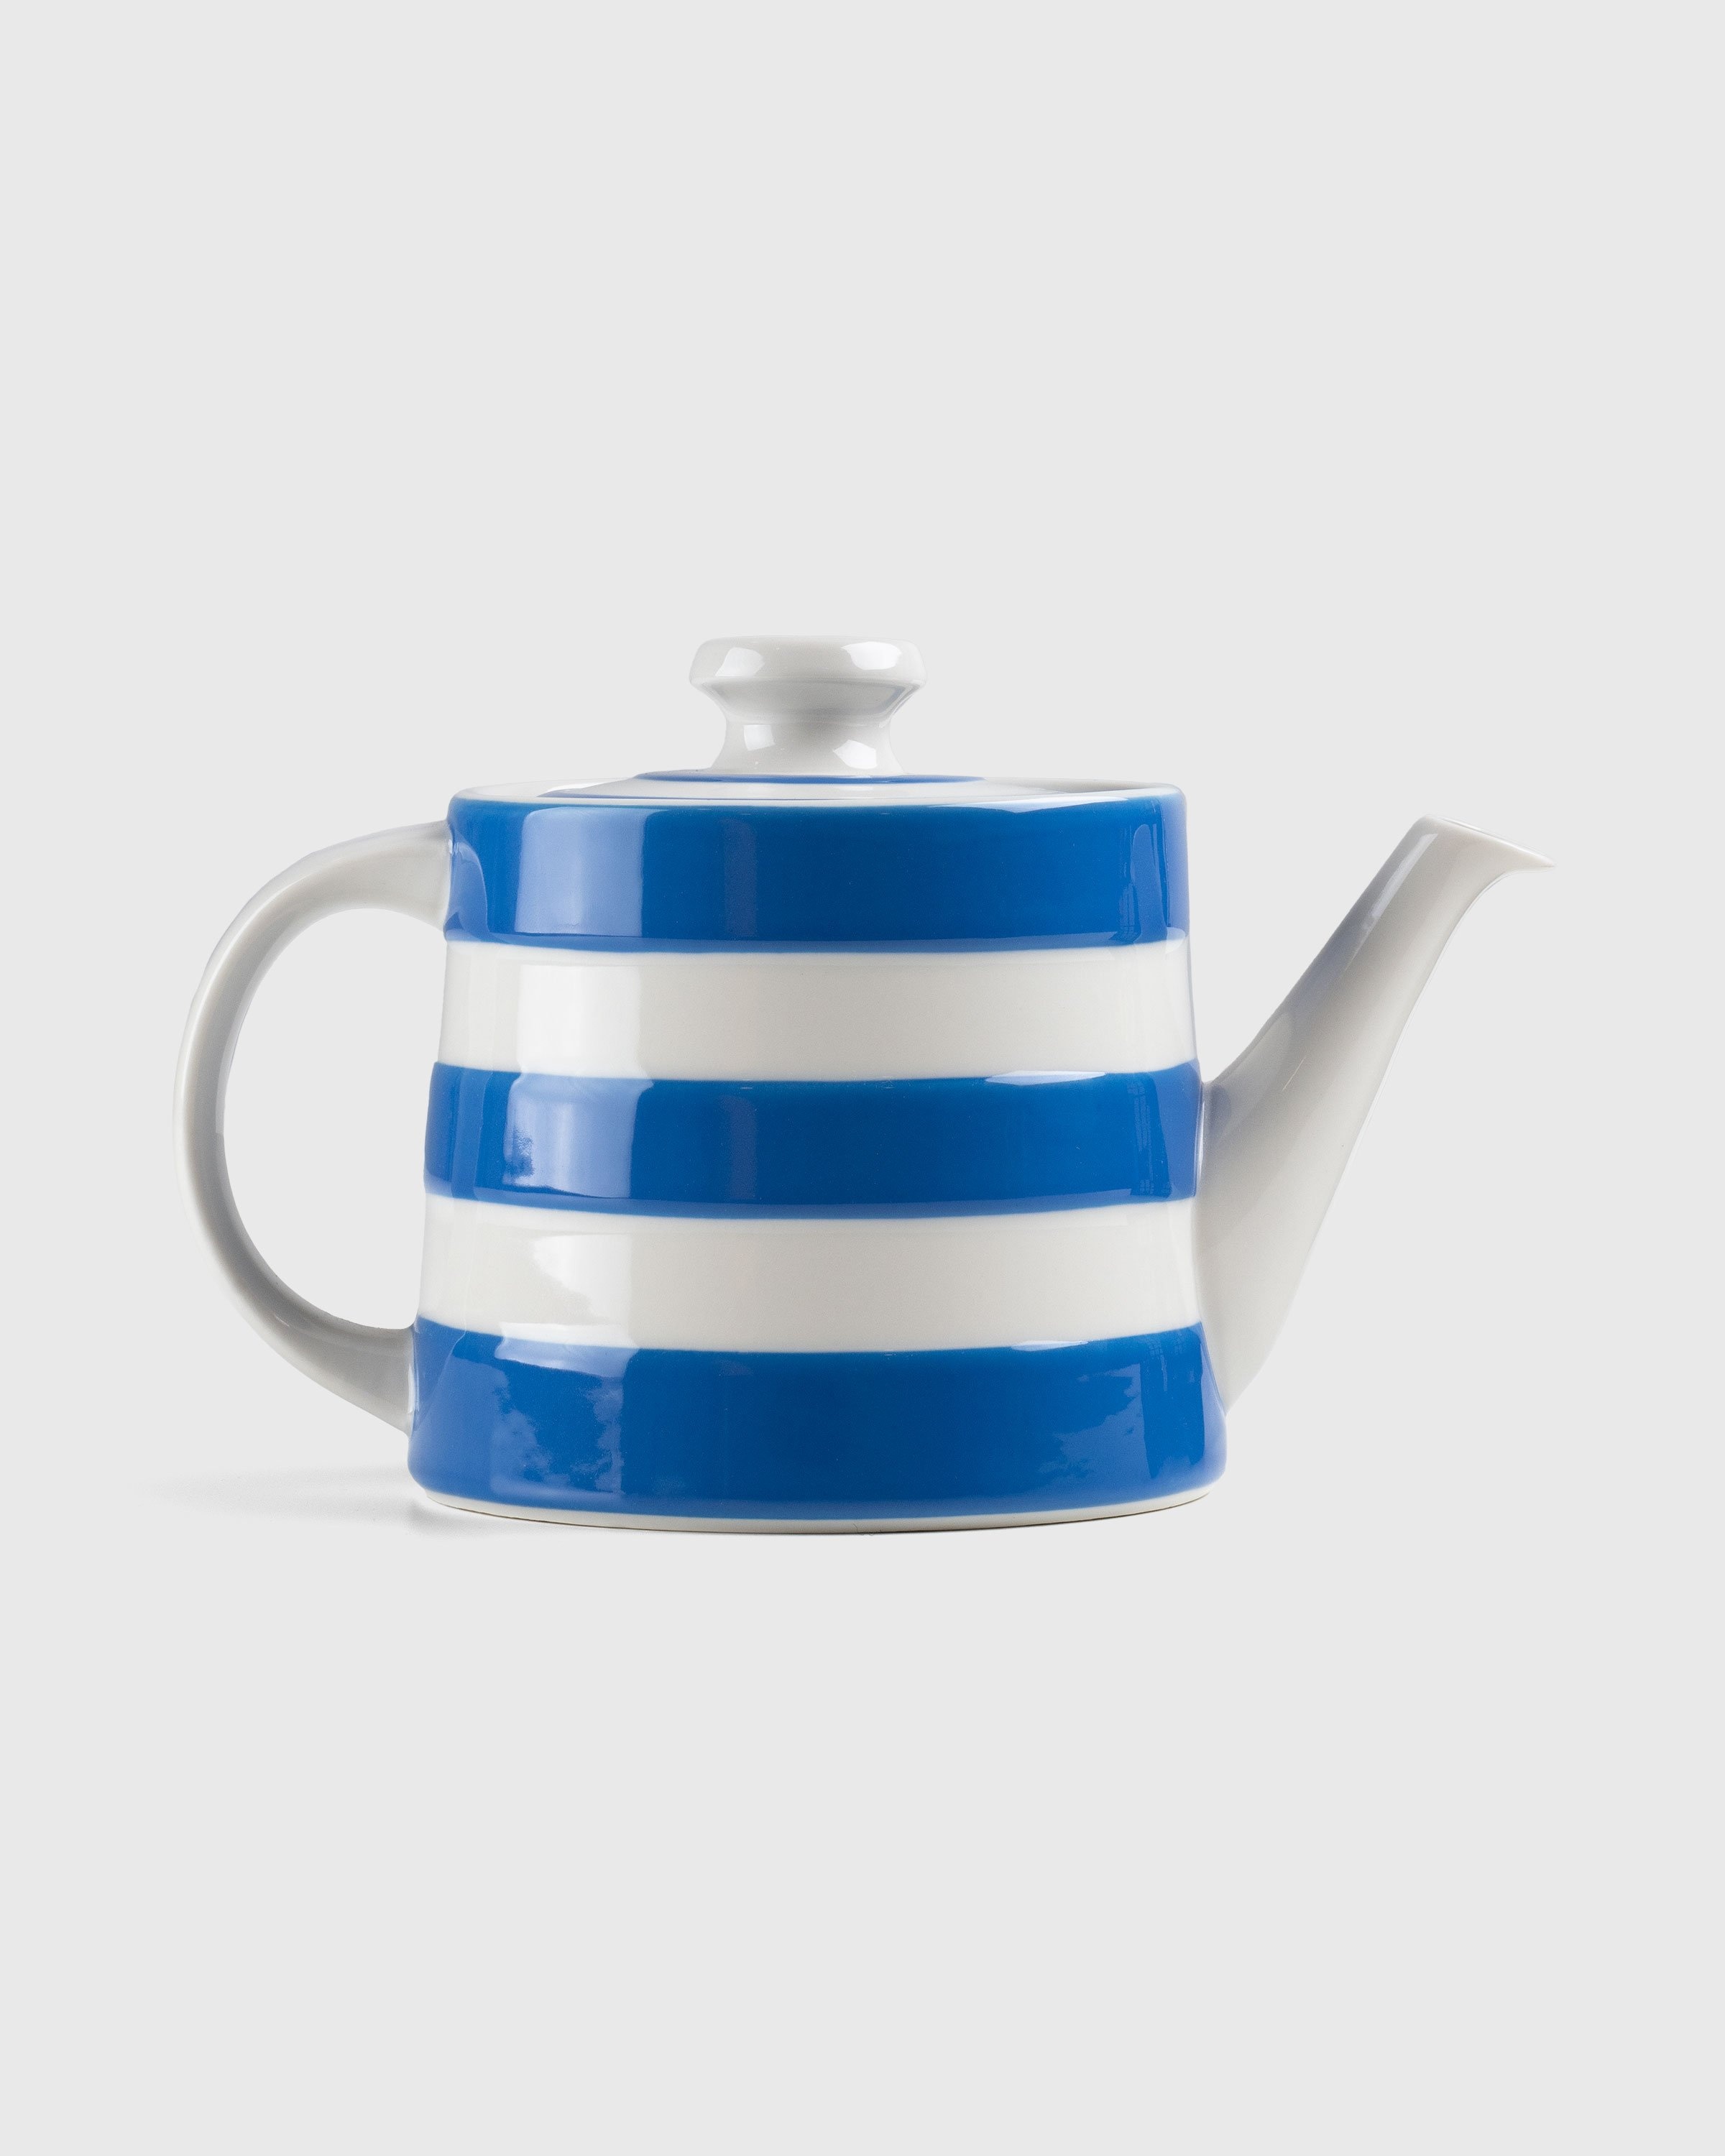 A.P.C. x J.W. Anderson – Afternoon Teapot | Highsnobiety Shop